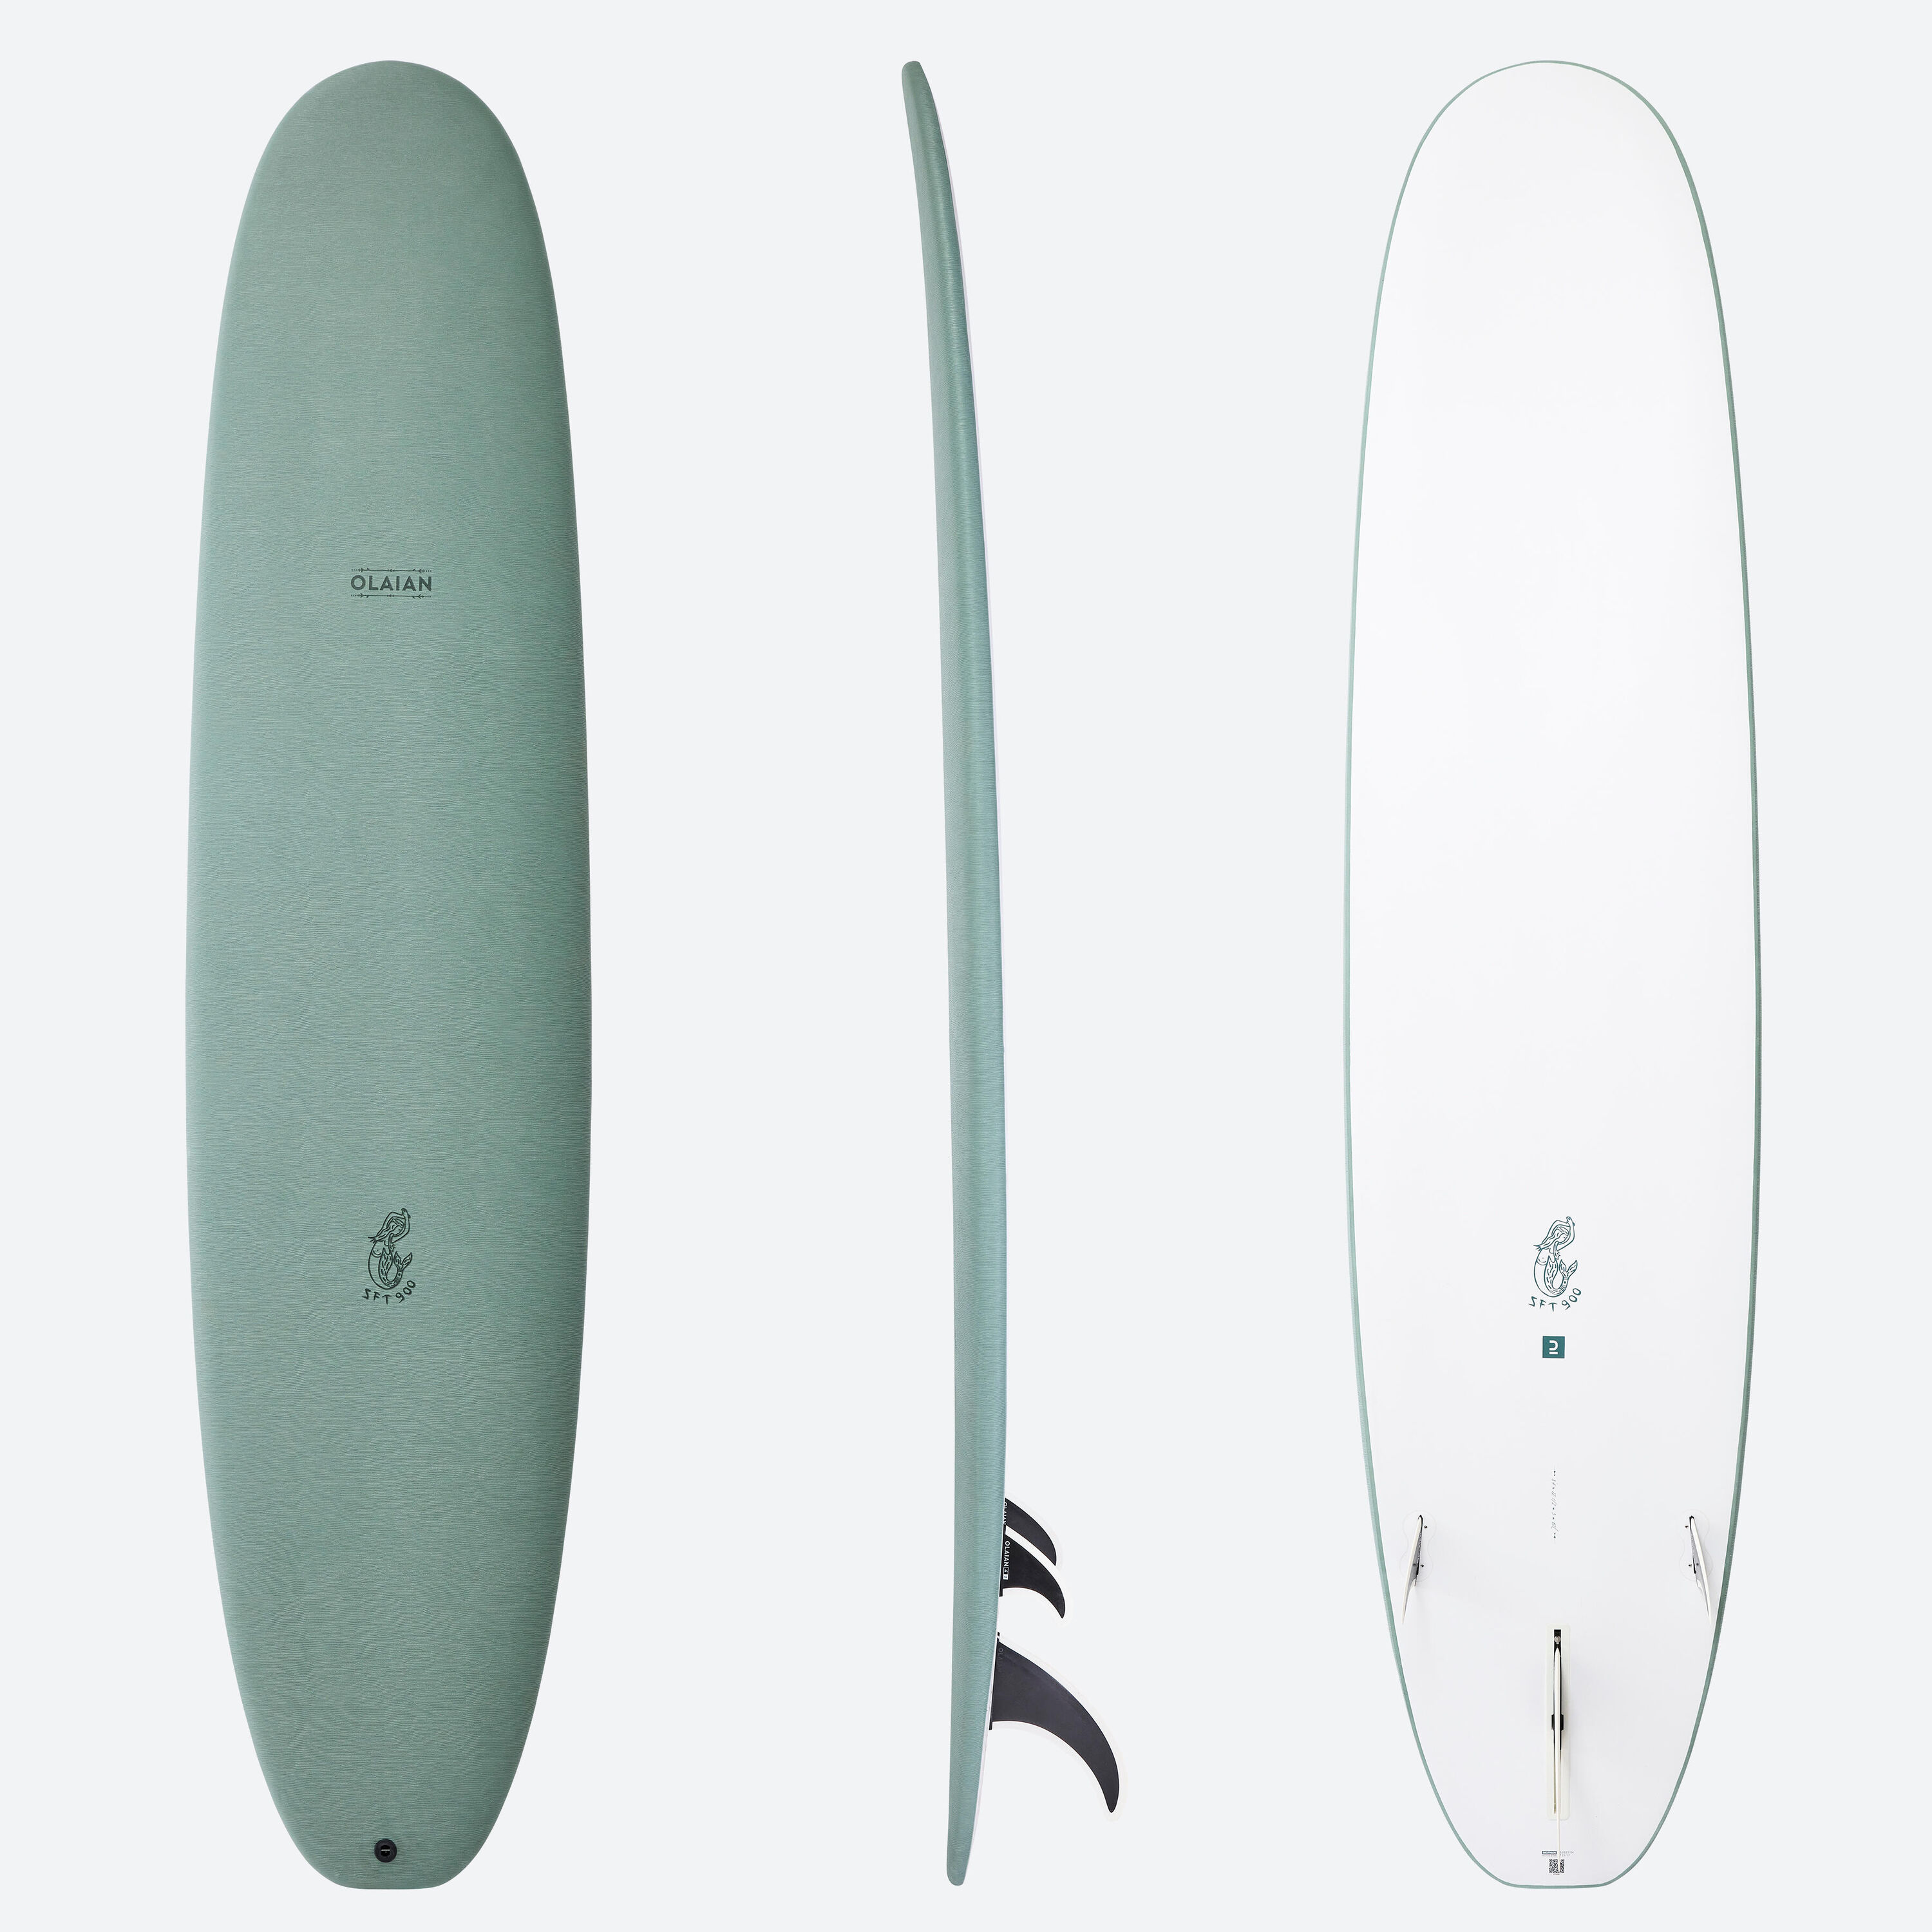 OLAIAN SURFBOARD 900 EPOXY SOFT 8'4 with 3 fins.